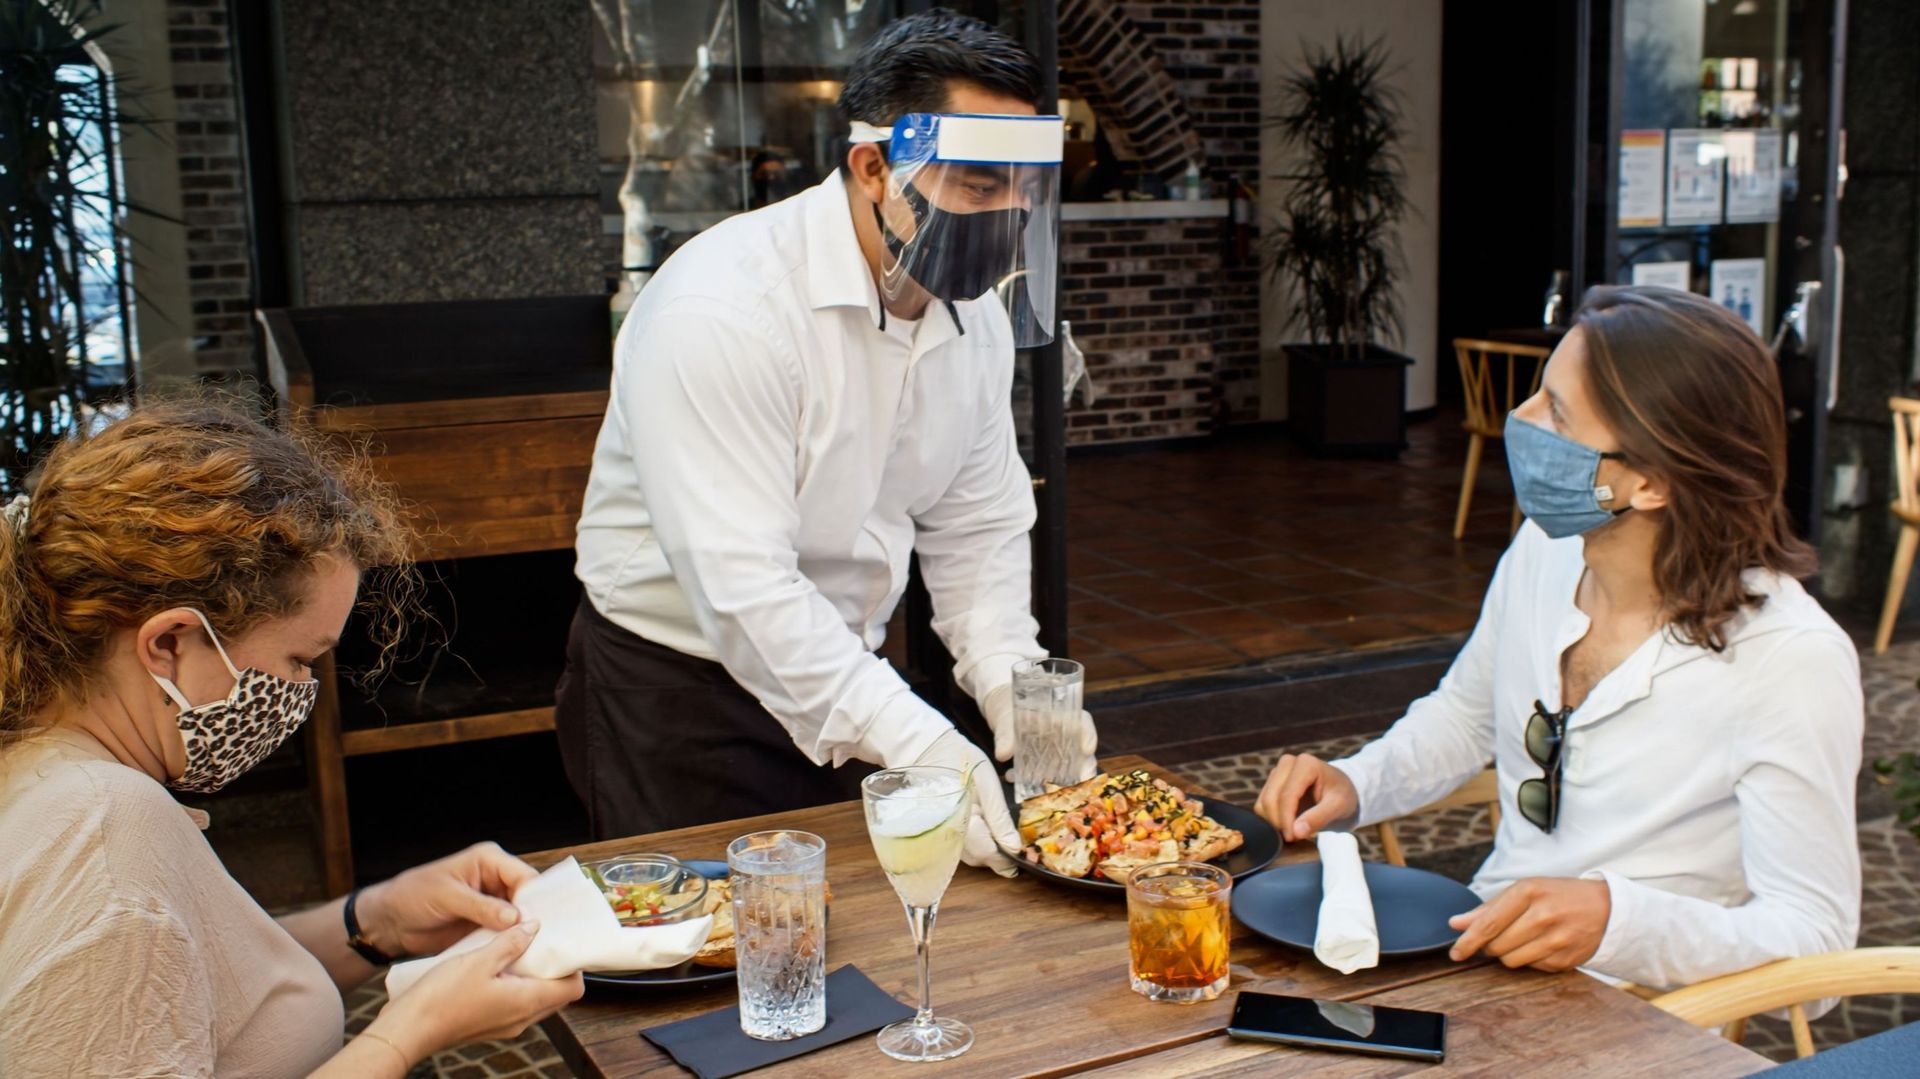 Waiter Wearing PPE During Covid-19 Pandemic Serving Food to Diners Wearing Masks